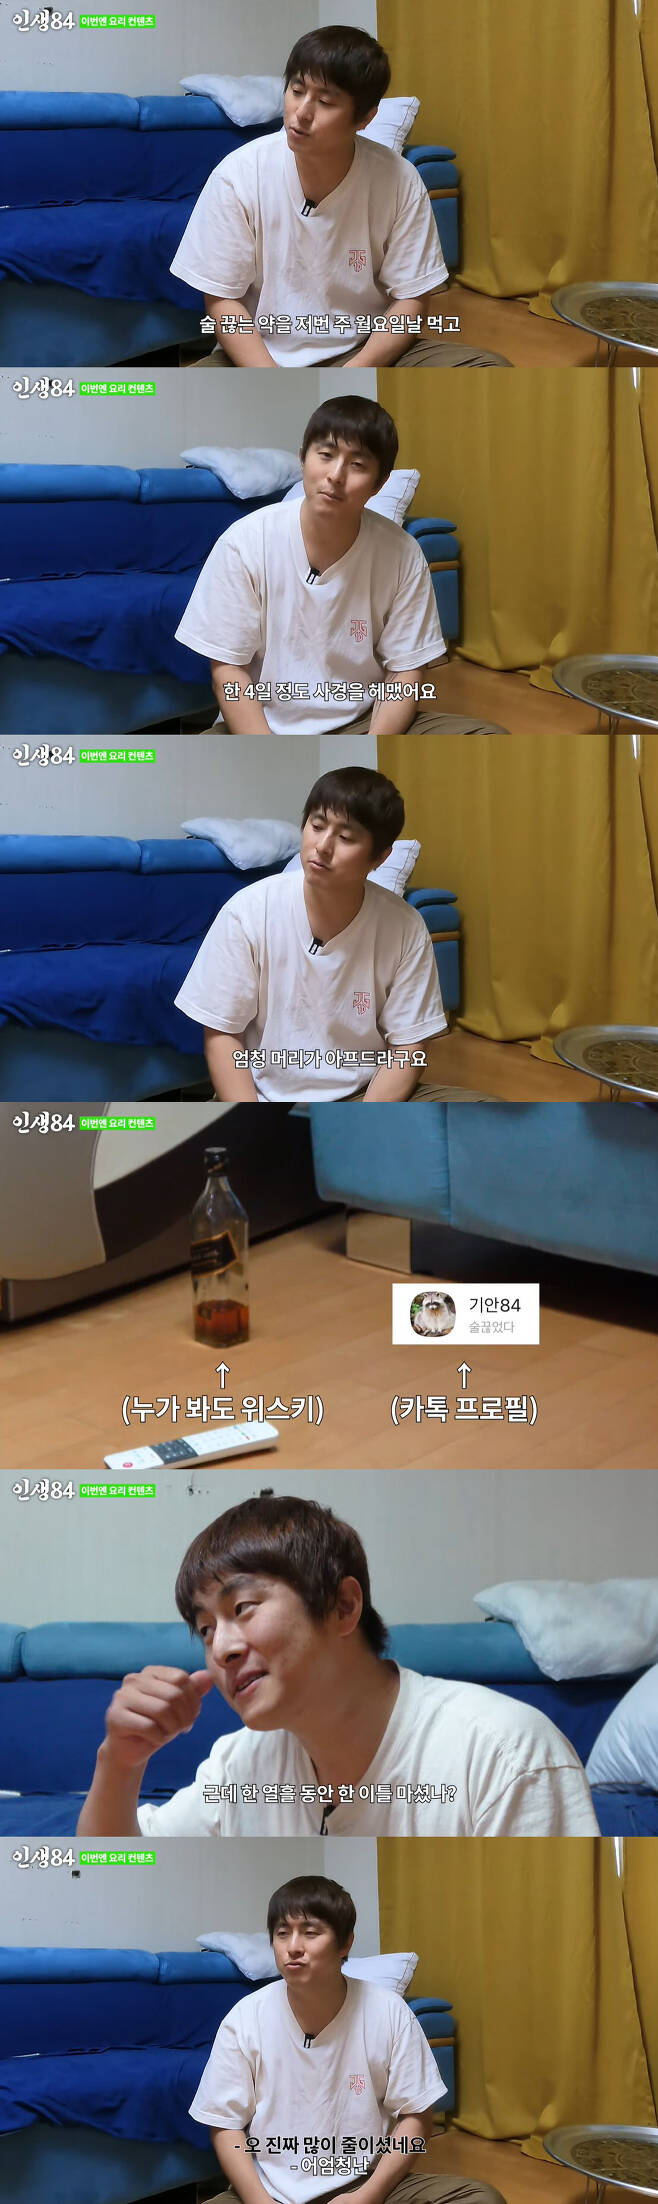 Webtoon writer Kian84 reveals he is trying to stay away from alcoholOn the 31st, Kian84s YouTube channel Life 84 has EP.4 Cook 84 content.In this video, Kian84 said, I have not been cooking for a long time, but I heard that cooking is good for me. I will make memories of my childhood and make the dishes I have eaten to PDs.I hope you will evaluate it, he said.Then he took out a small table and said, My father, mother, grandmother, and my family always ate at this table at elementary school. I studied here.Kian84, who does not use the main table in the kitchen at mealtimes, said, I hate what is around when I eat, I have to have food and alcohol.When the story came out, the production team pointed to the whiskey in the corner and asked, I told you I quit drinking.Kian84 said: I ate my drinking pill last Monday and spent four days wandering through A Home with a View, my head was sore.I have been drinking for two days for ten days. It is a huge change. I am trying to improve my constitution.Since then, Kian84 has been eating pork belly and fried rice to complete his own rice cookery. Kian84 is happy to eat delicious food when he sees the reaction of the production team.In the meantime, I seem to have eaten food like oil in a car without meaning. It is a window of communication. To subscribers, I will eat food mainly, but sometimes it will not be bad to cook to my girlfriend, parents, and friends once in a while.It is not more annoying than I thought, he recommended.